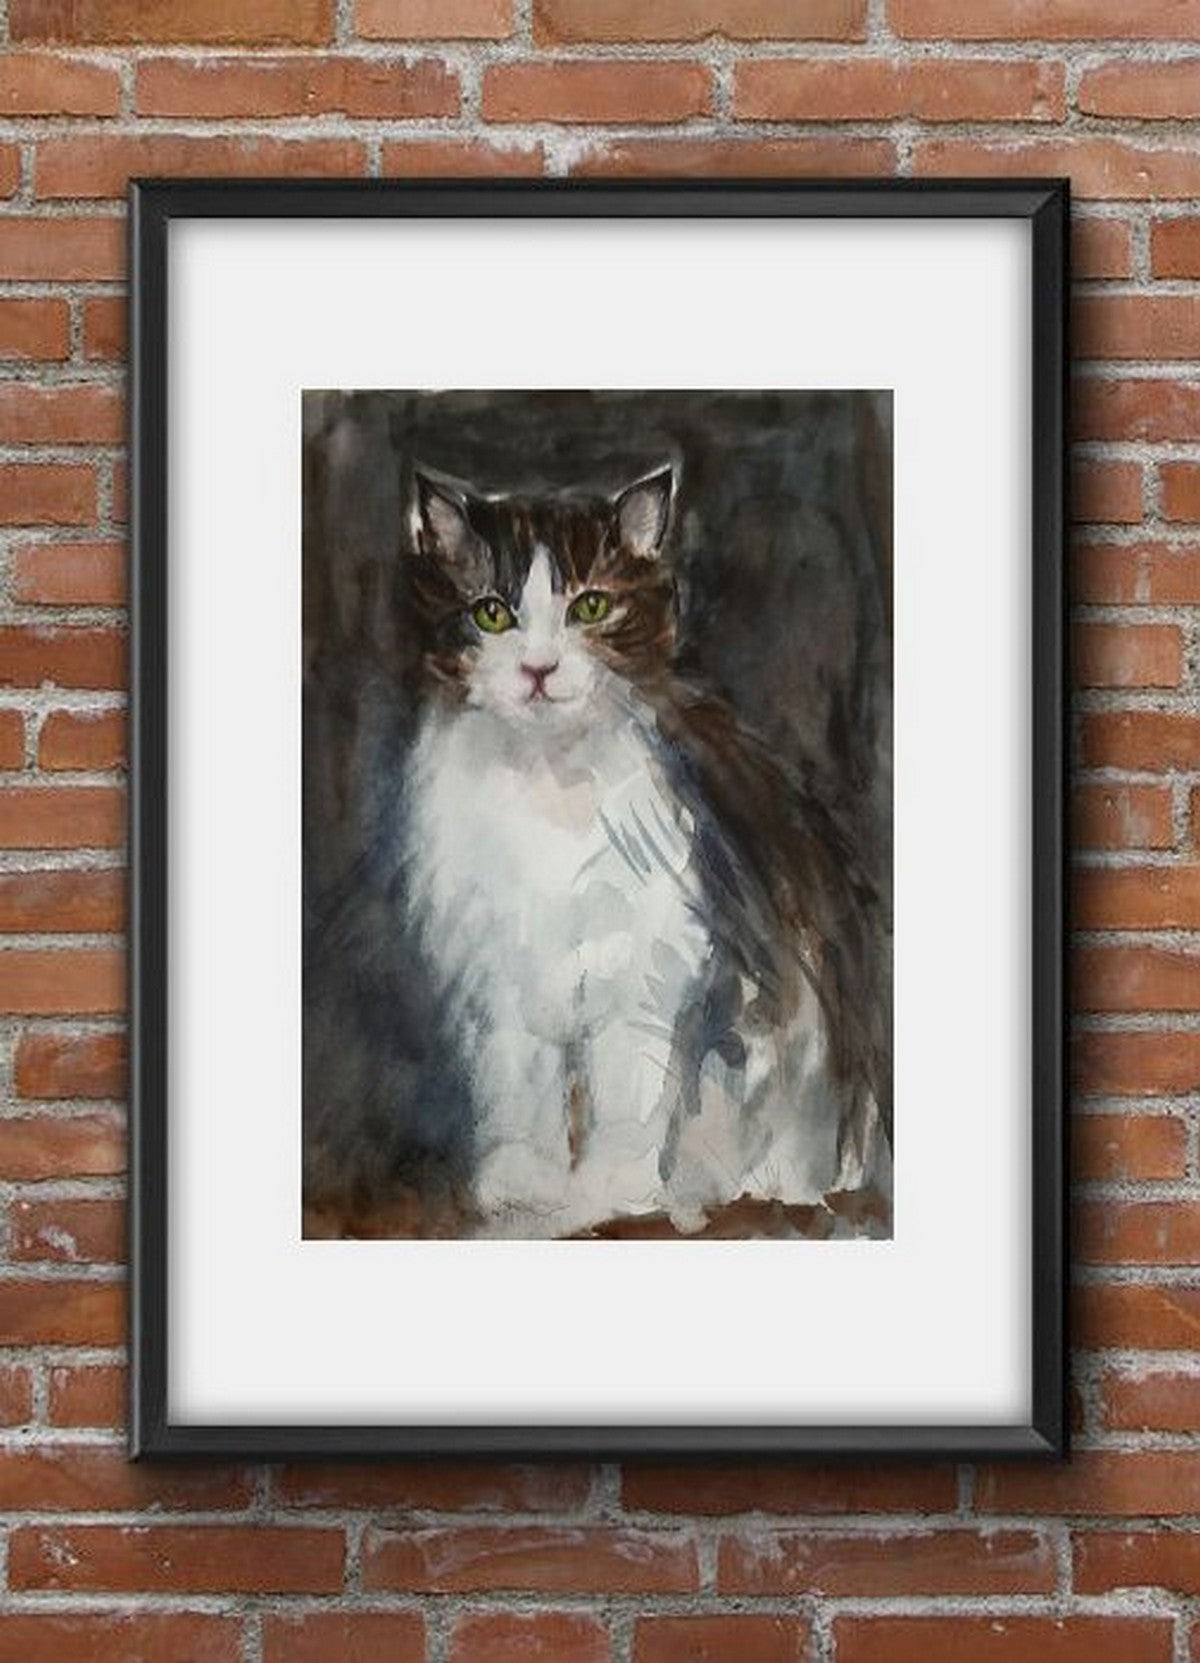 Virtual frame and wall view, The Sober Cat, watercolors on paper